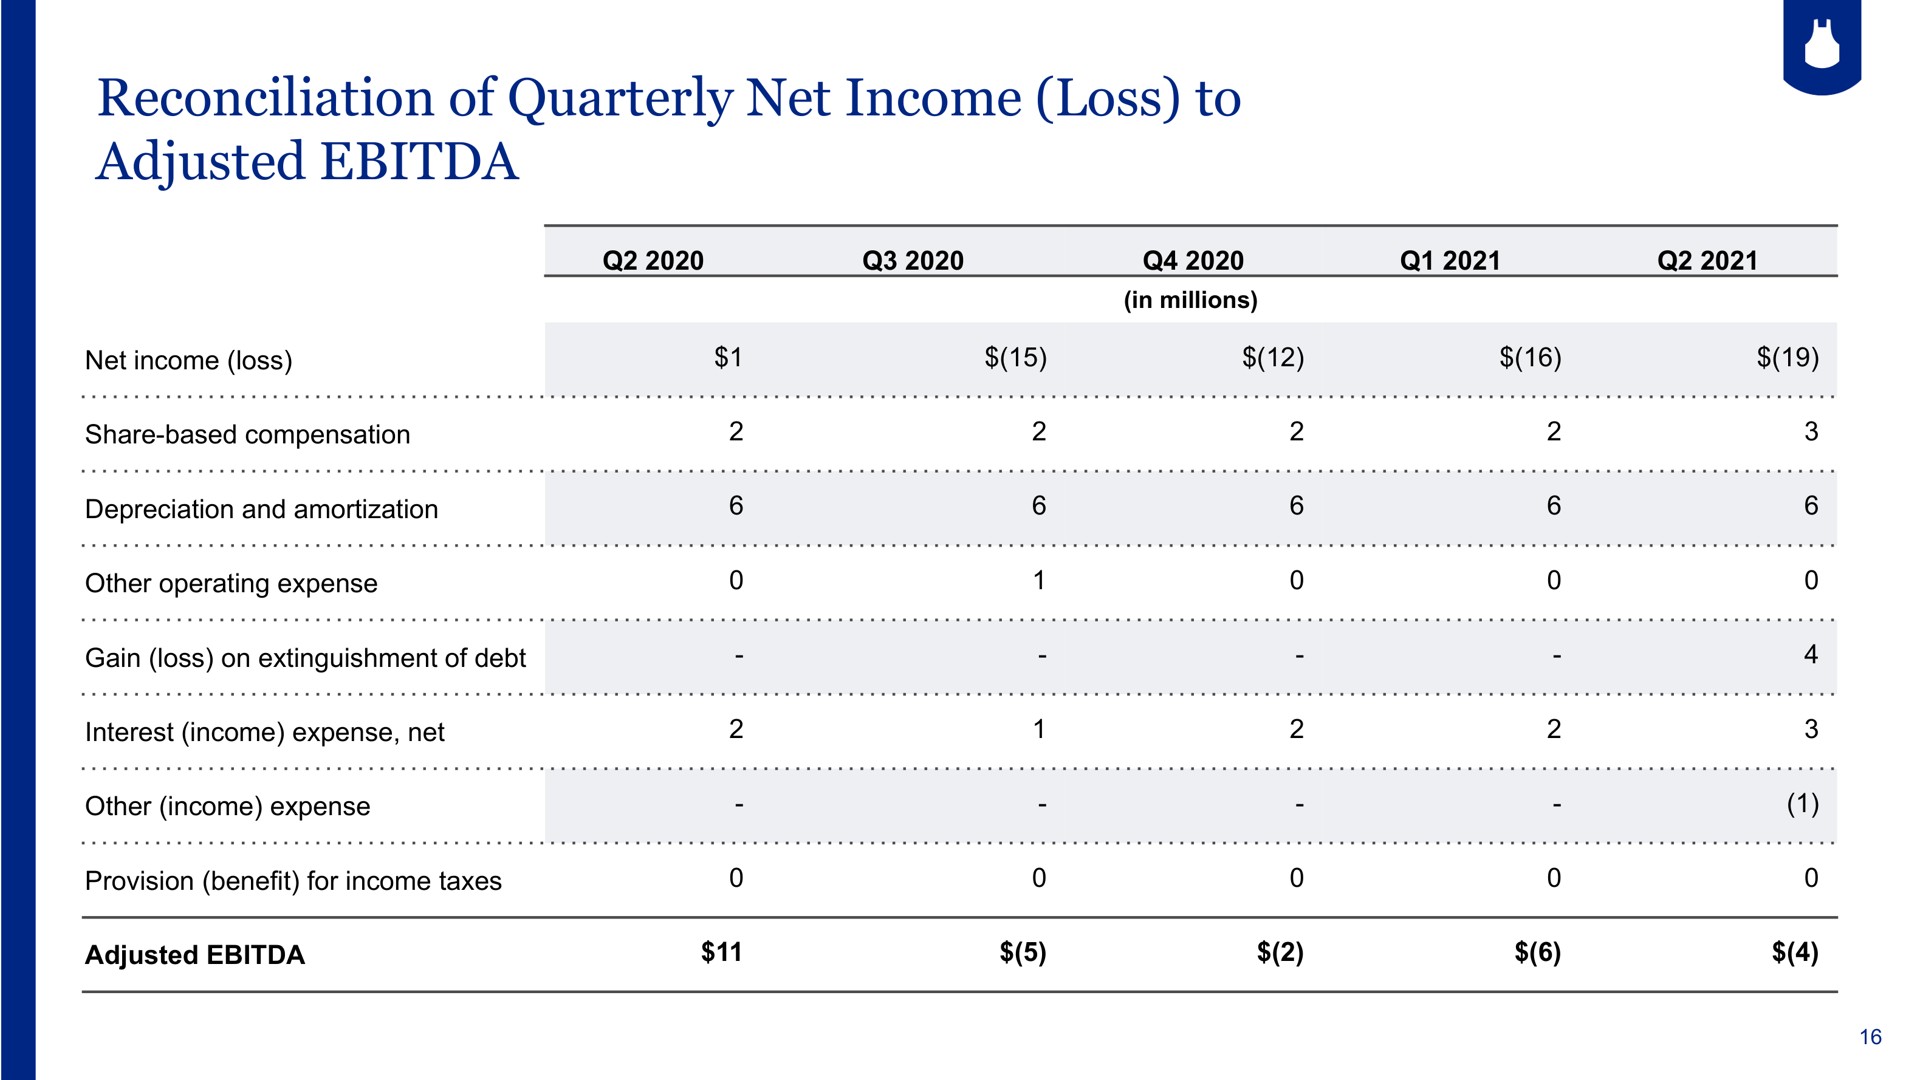 reconciliation of quarterly net income loss to adjusted a a as cee a a a aes pone sere a dee eer | Blue Apron